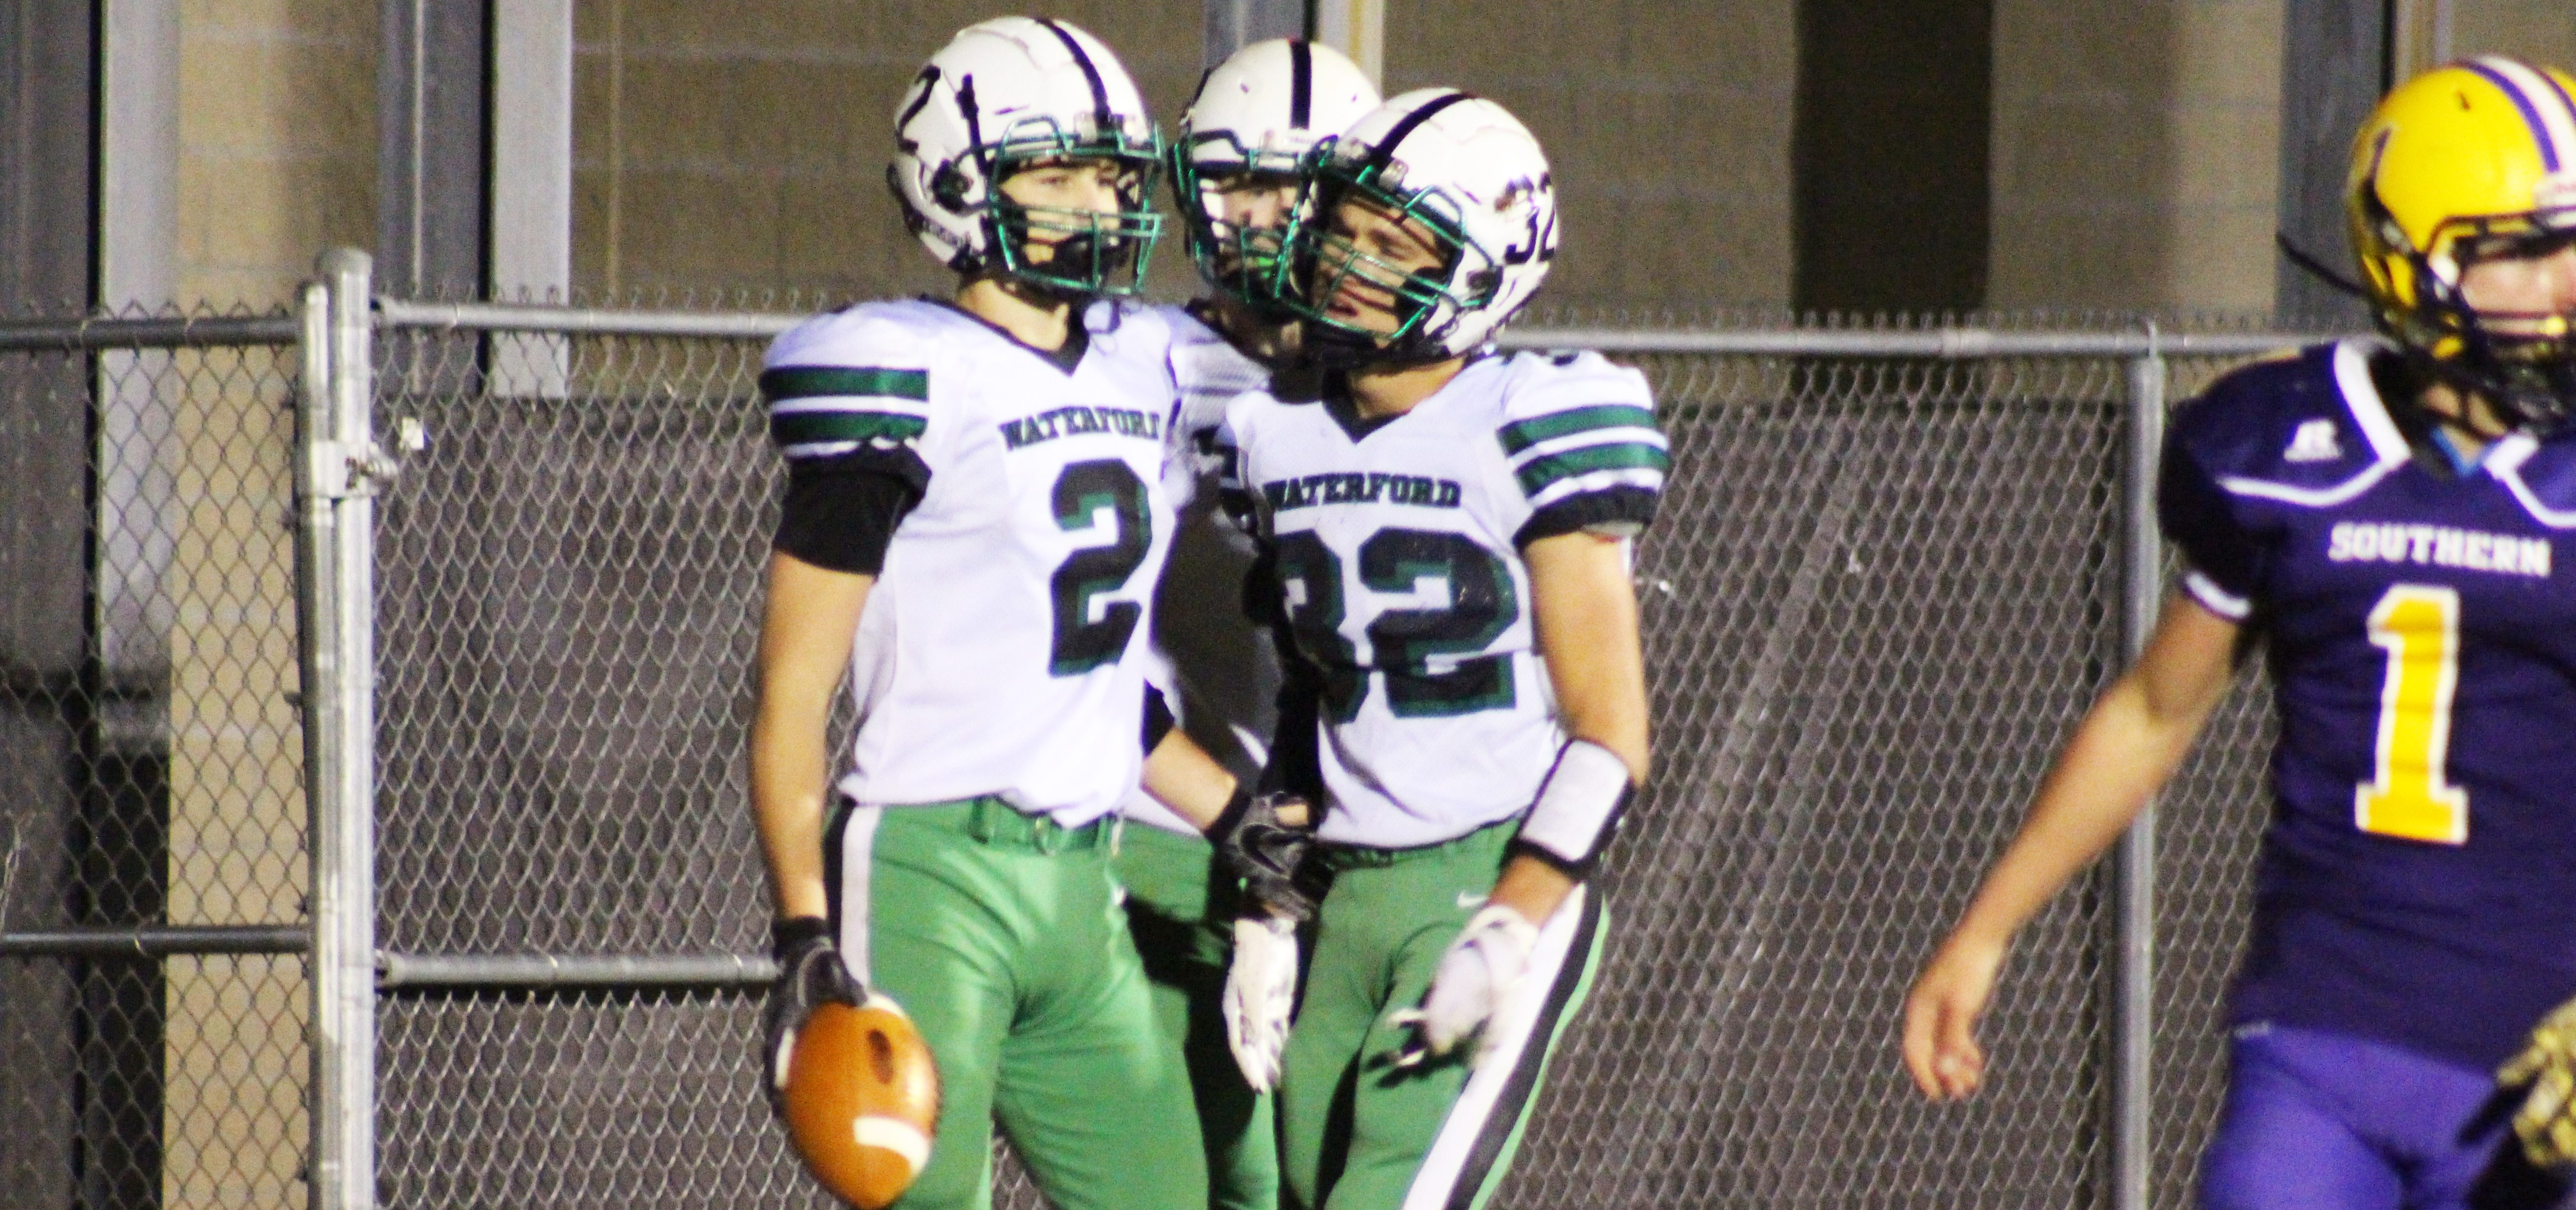 Waterford Wildcat players Joe Pantelidis and Holden Dailey celebrate after scoring a touchdown